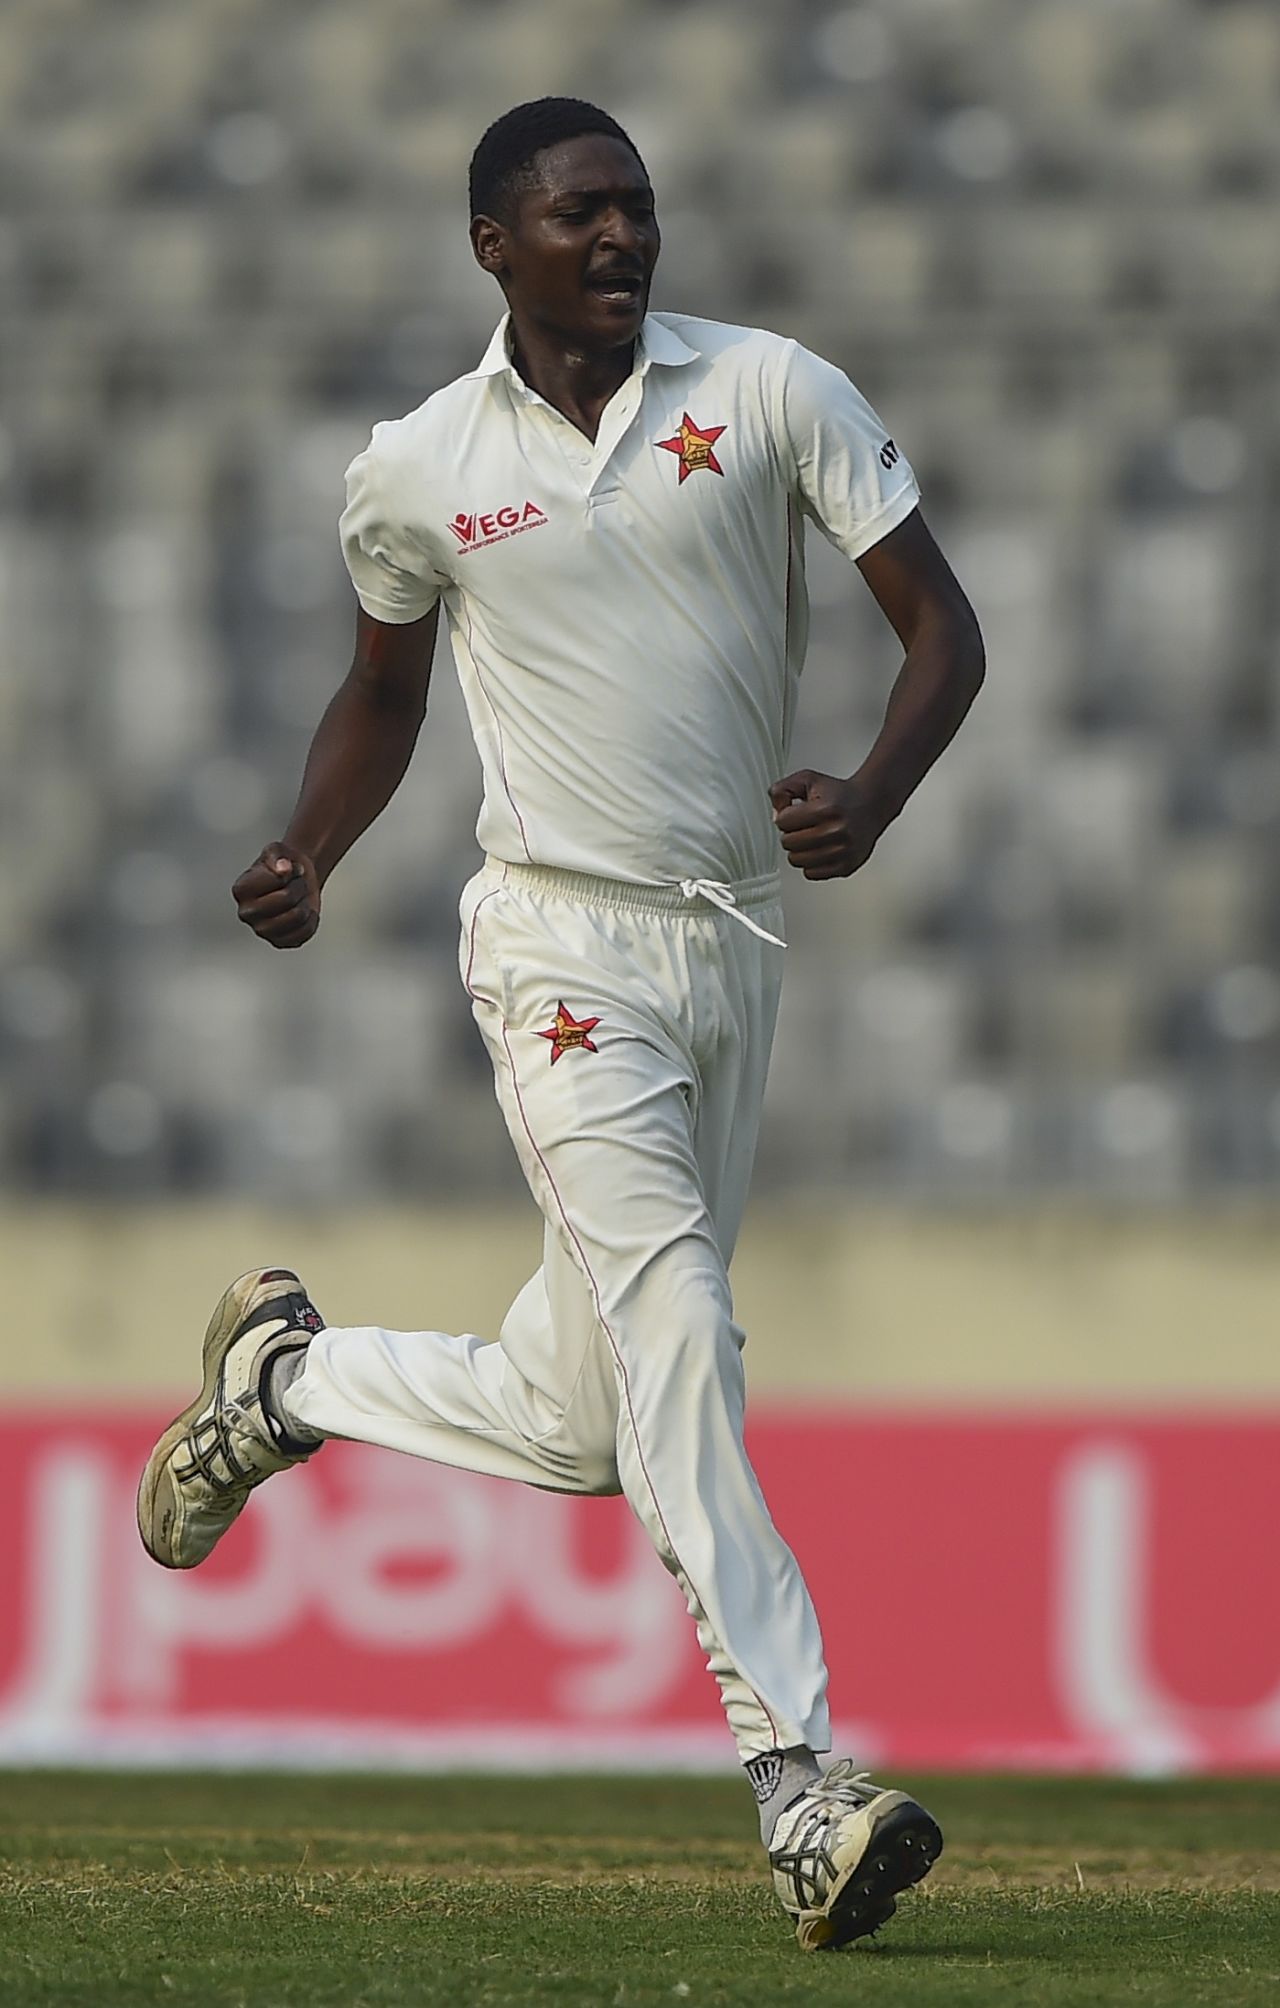 Charlton Tshuma is pumped after picking up his first Test wicket, Bangladesh v Zimbabwe, Only Test, Dhaka, 2nd day, February 23, 2020